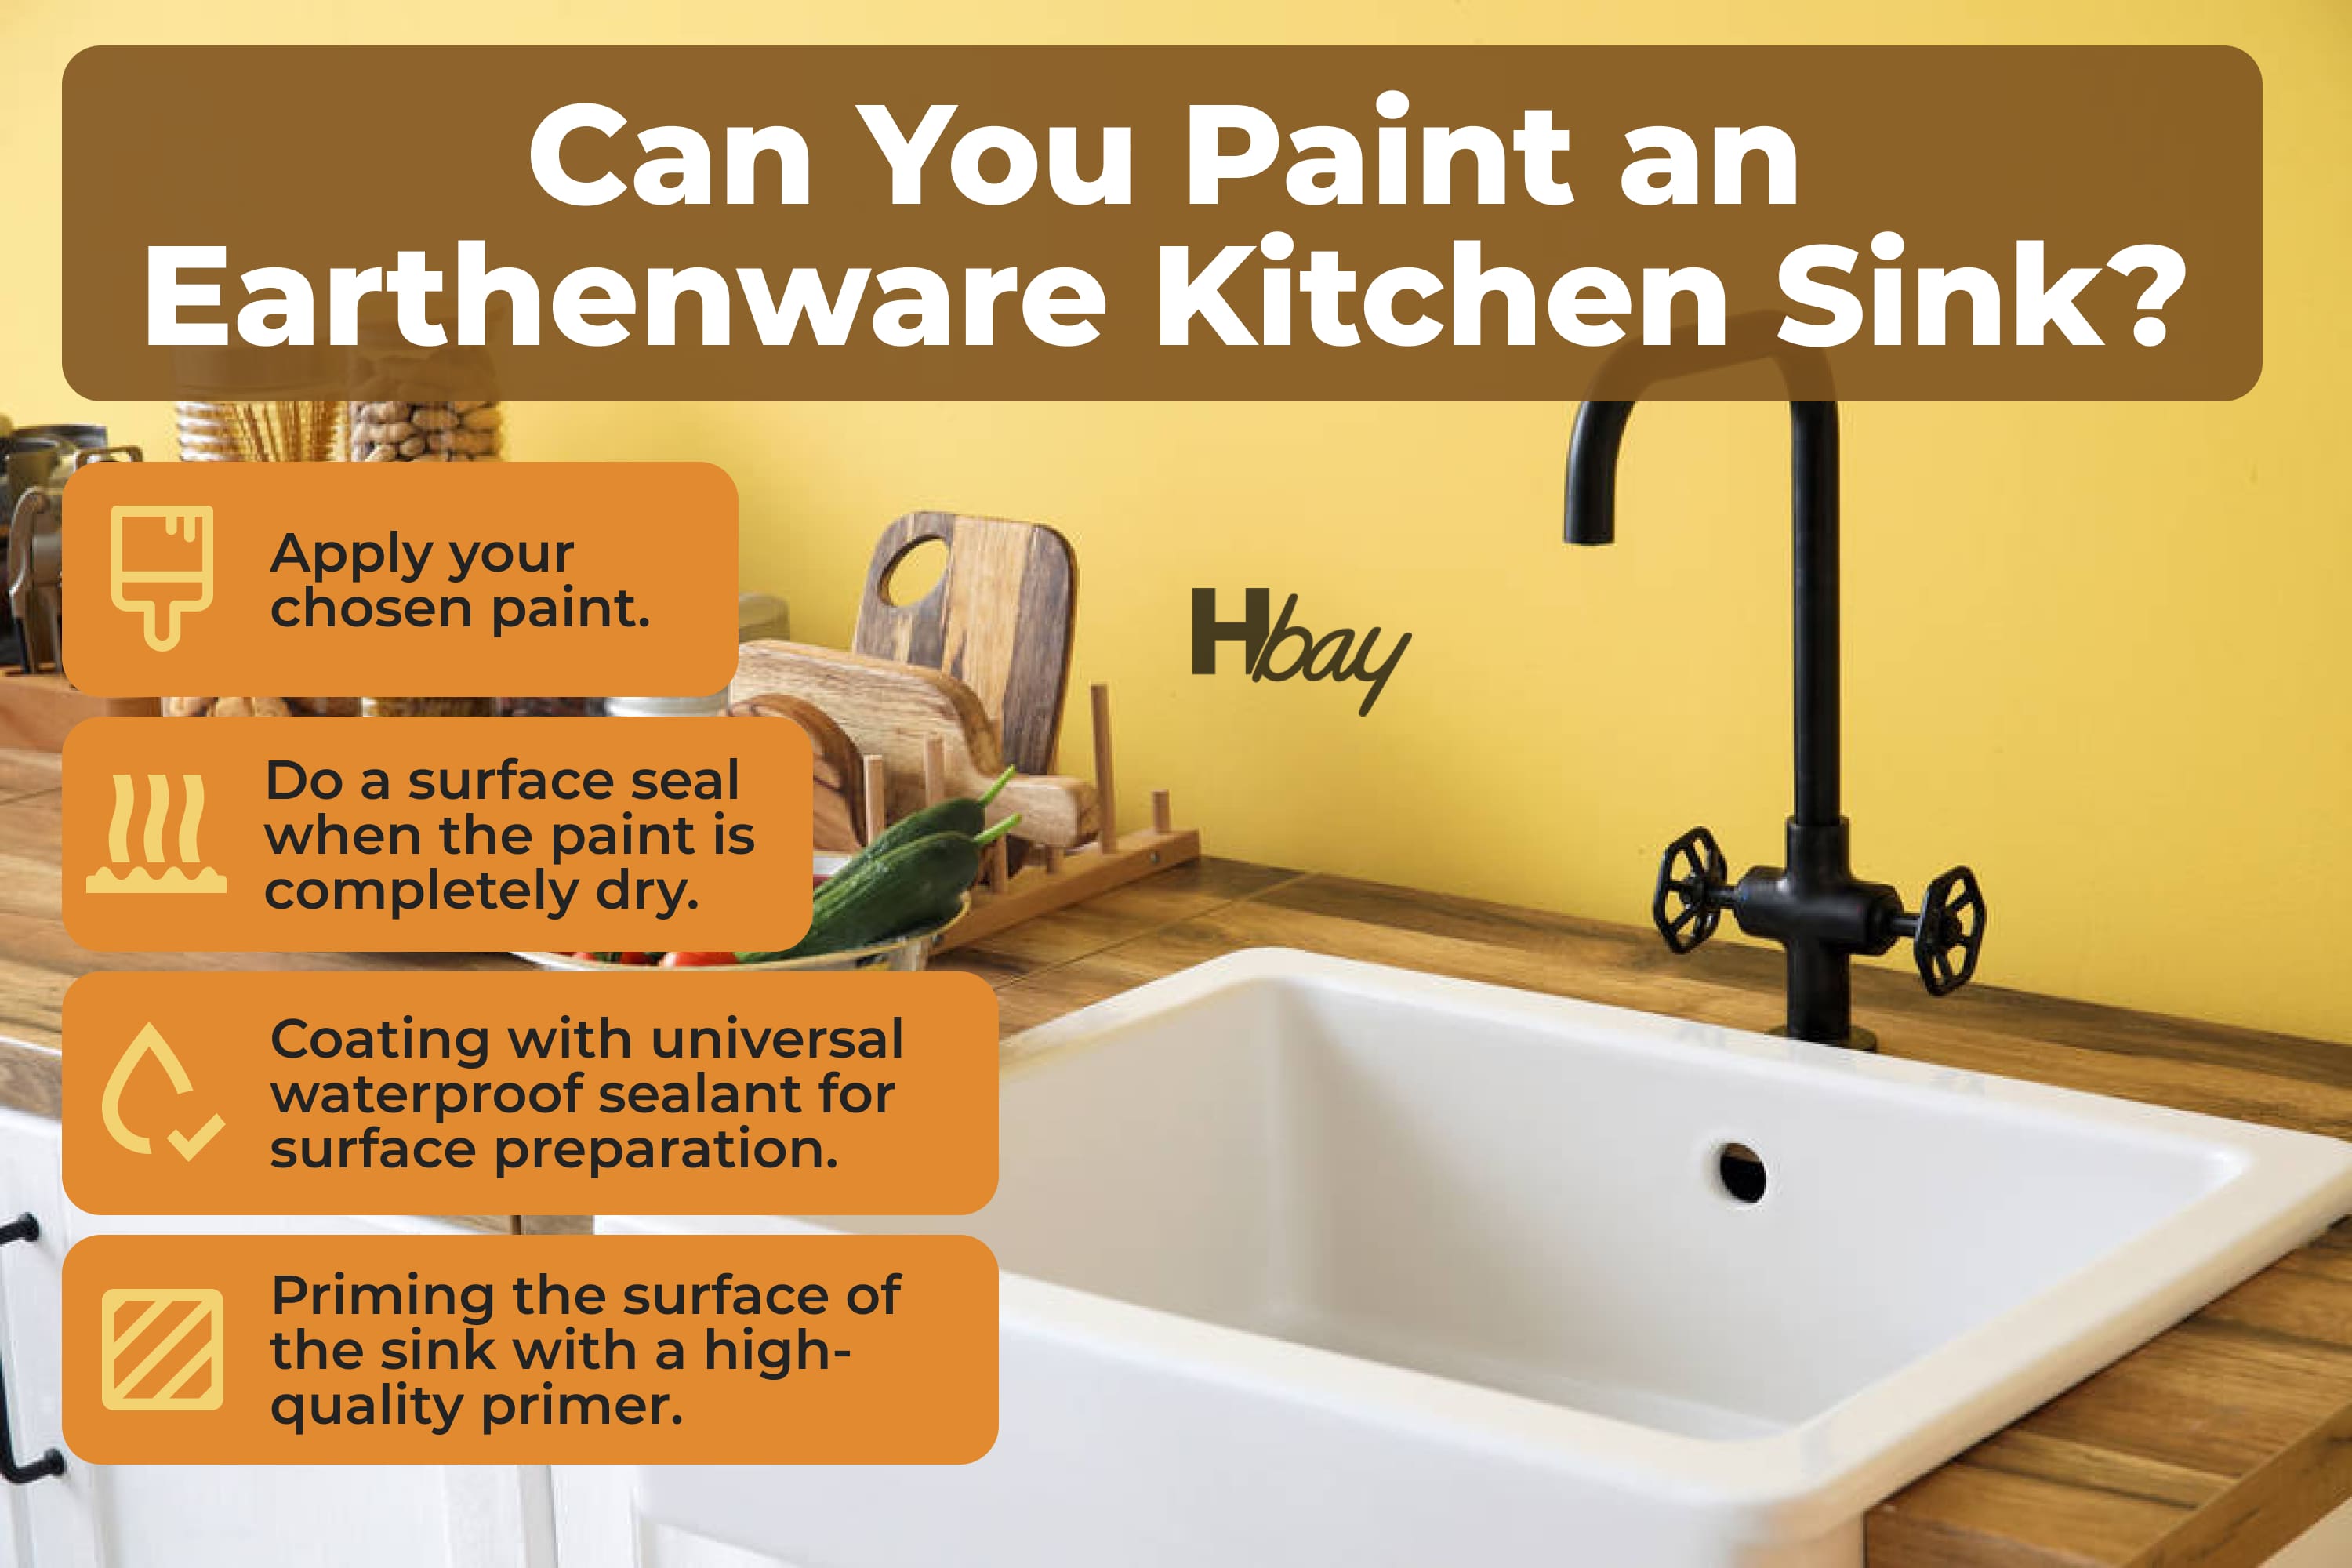 Can You Paint an Earthenware Kitchen Sink